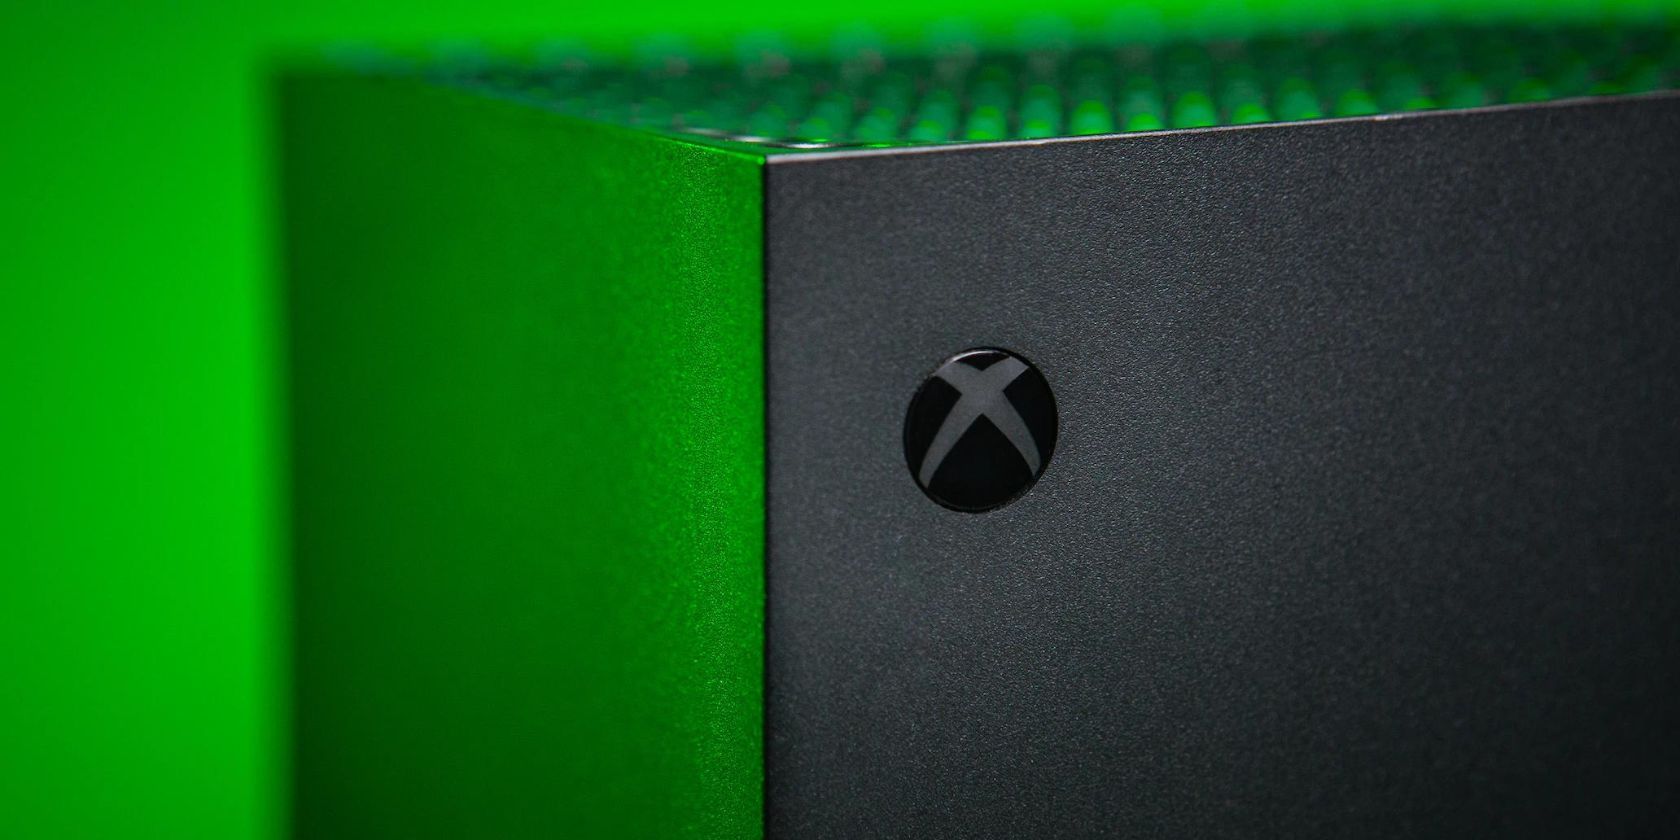 A close-up of the Xbox logo on the Xbox Series SX console